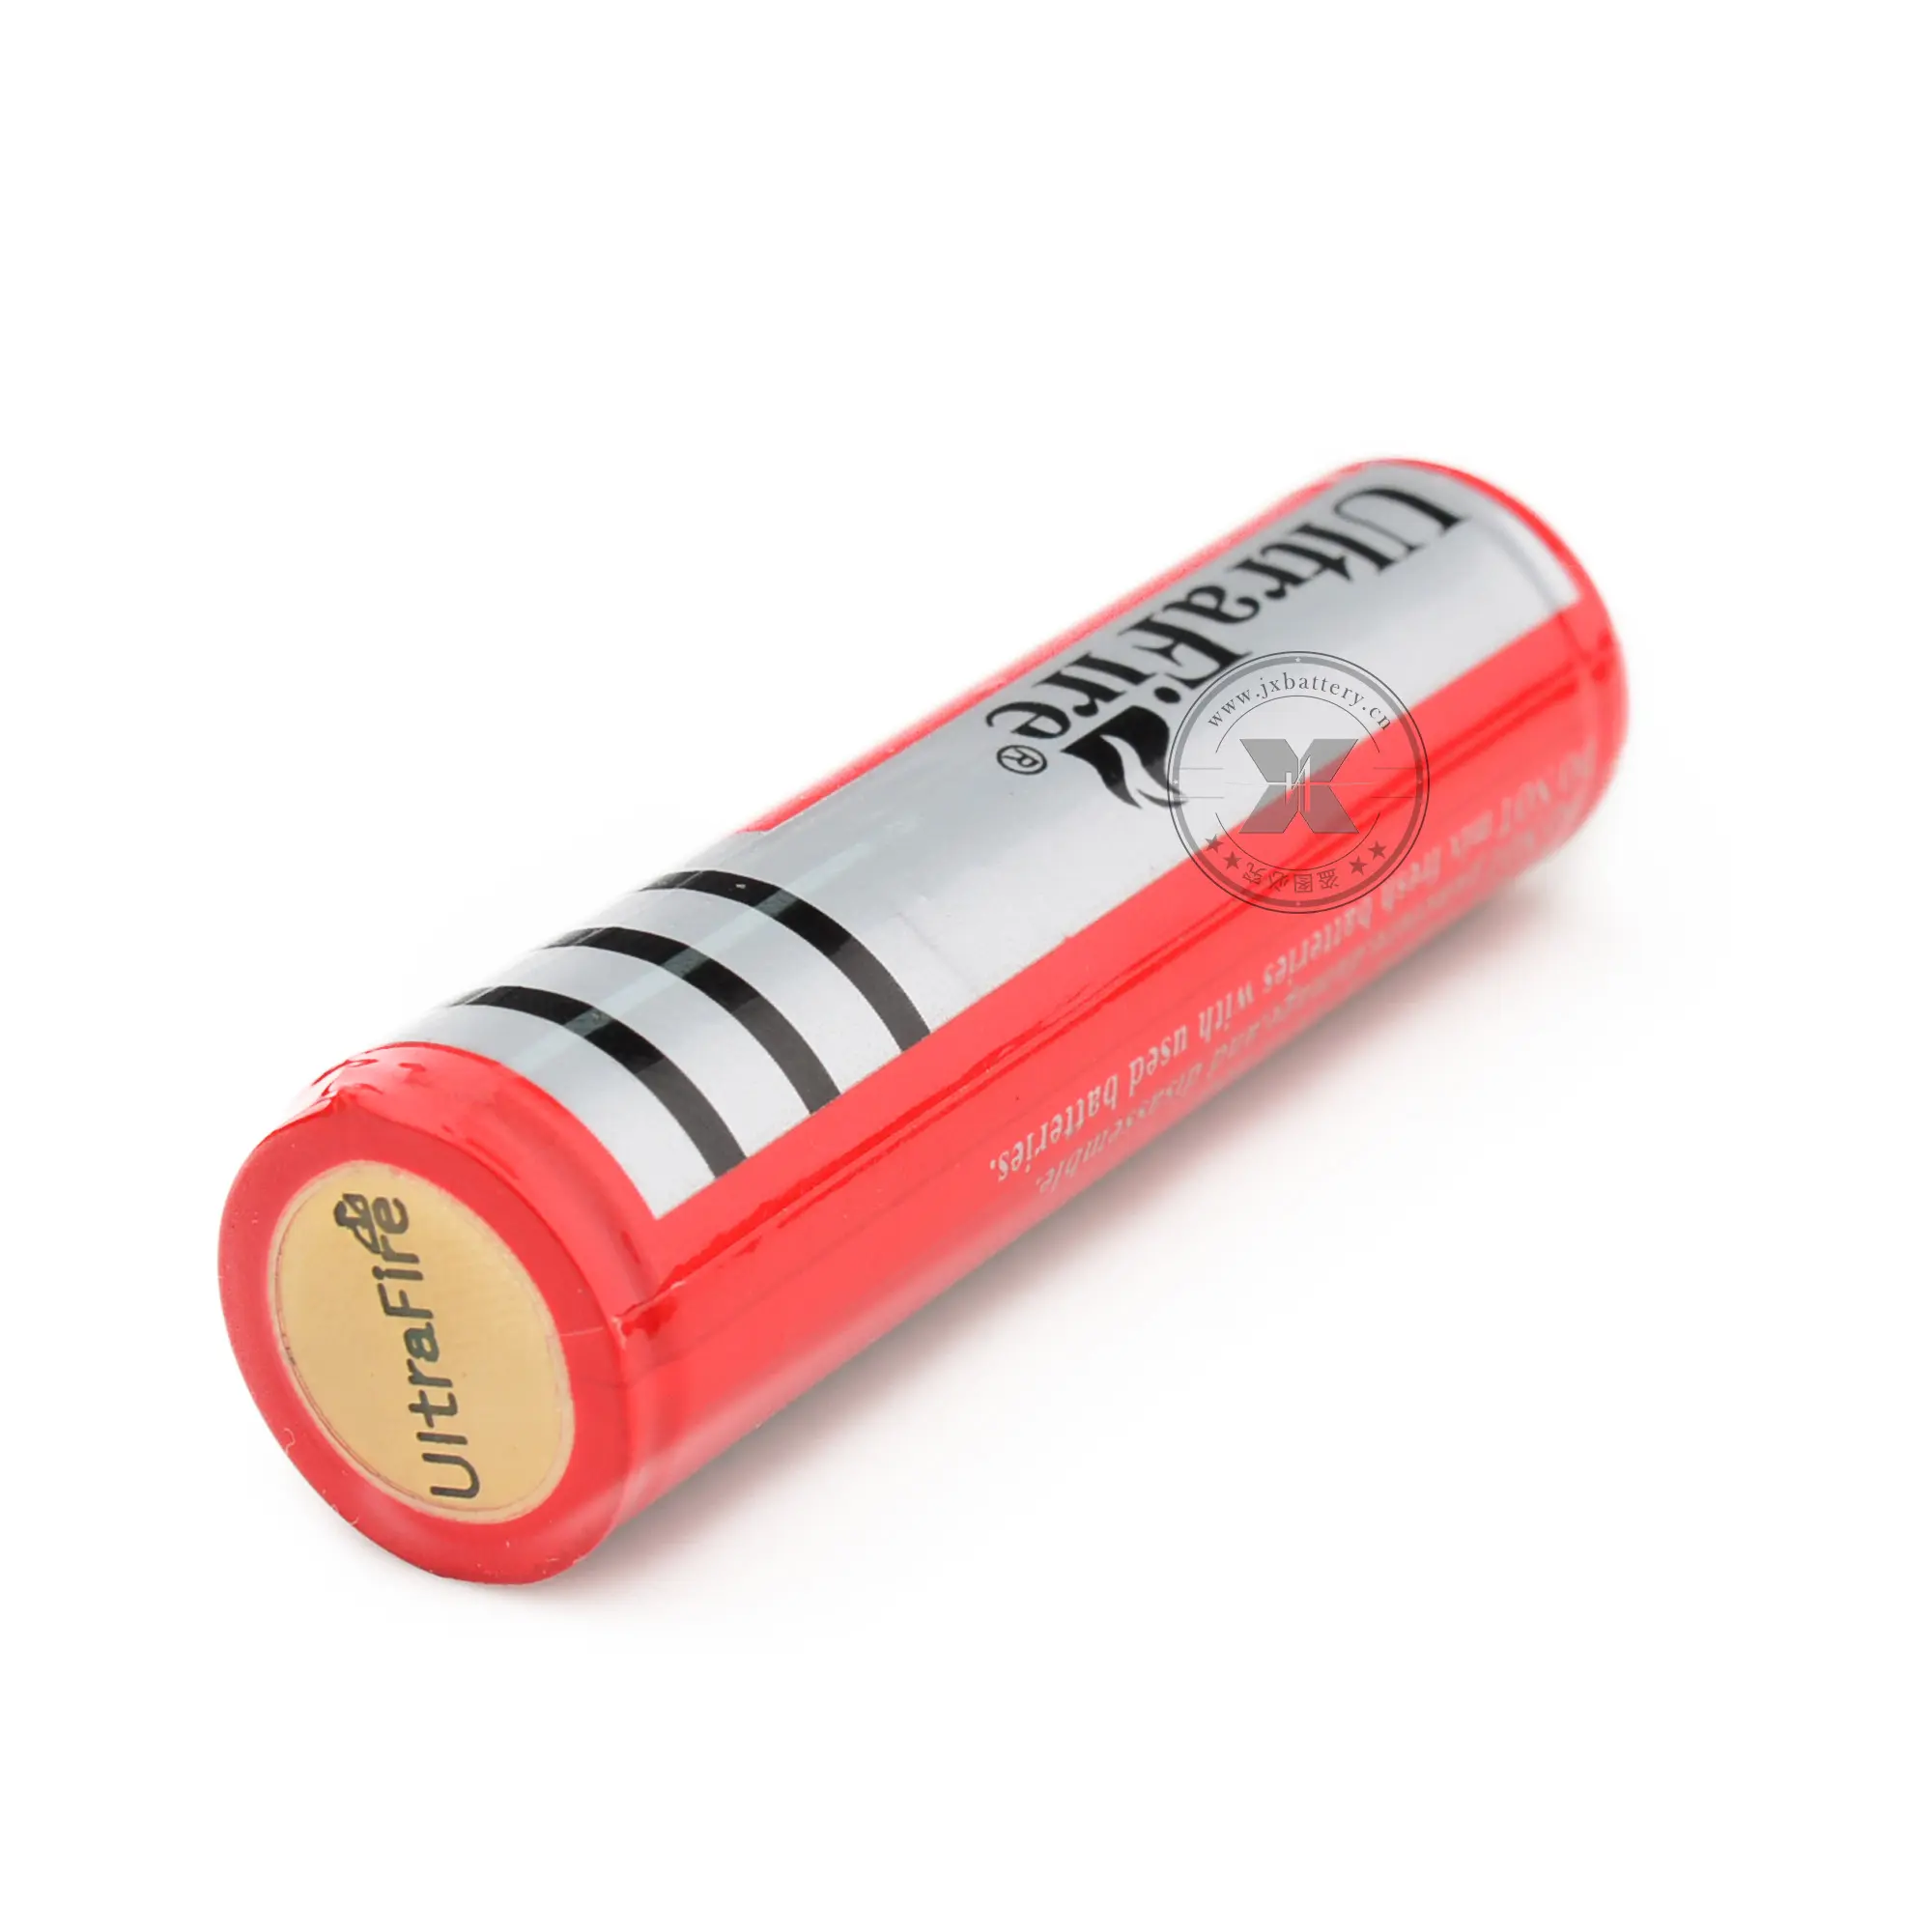 flashlight battery 18650 3000mAh rechargeable battery for torch